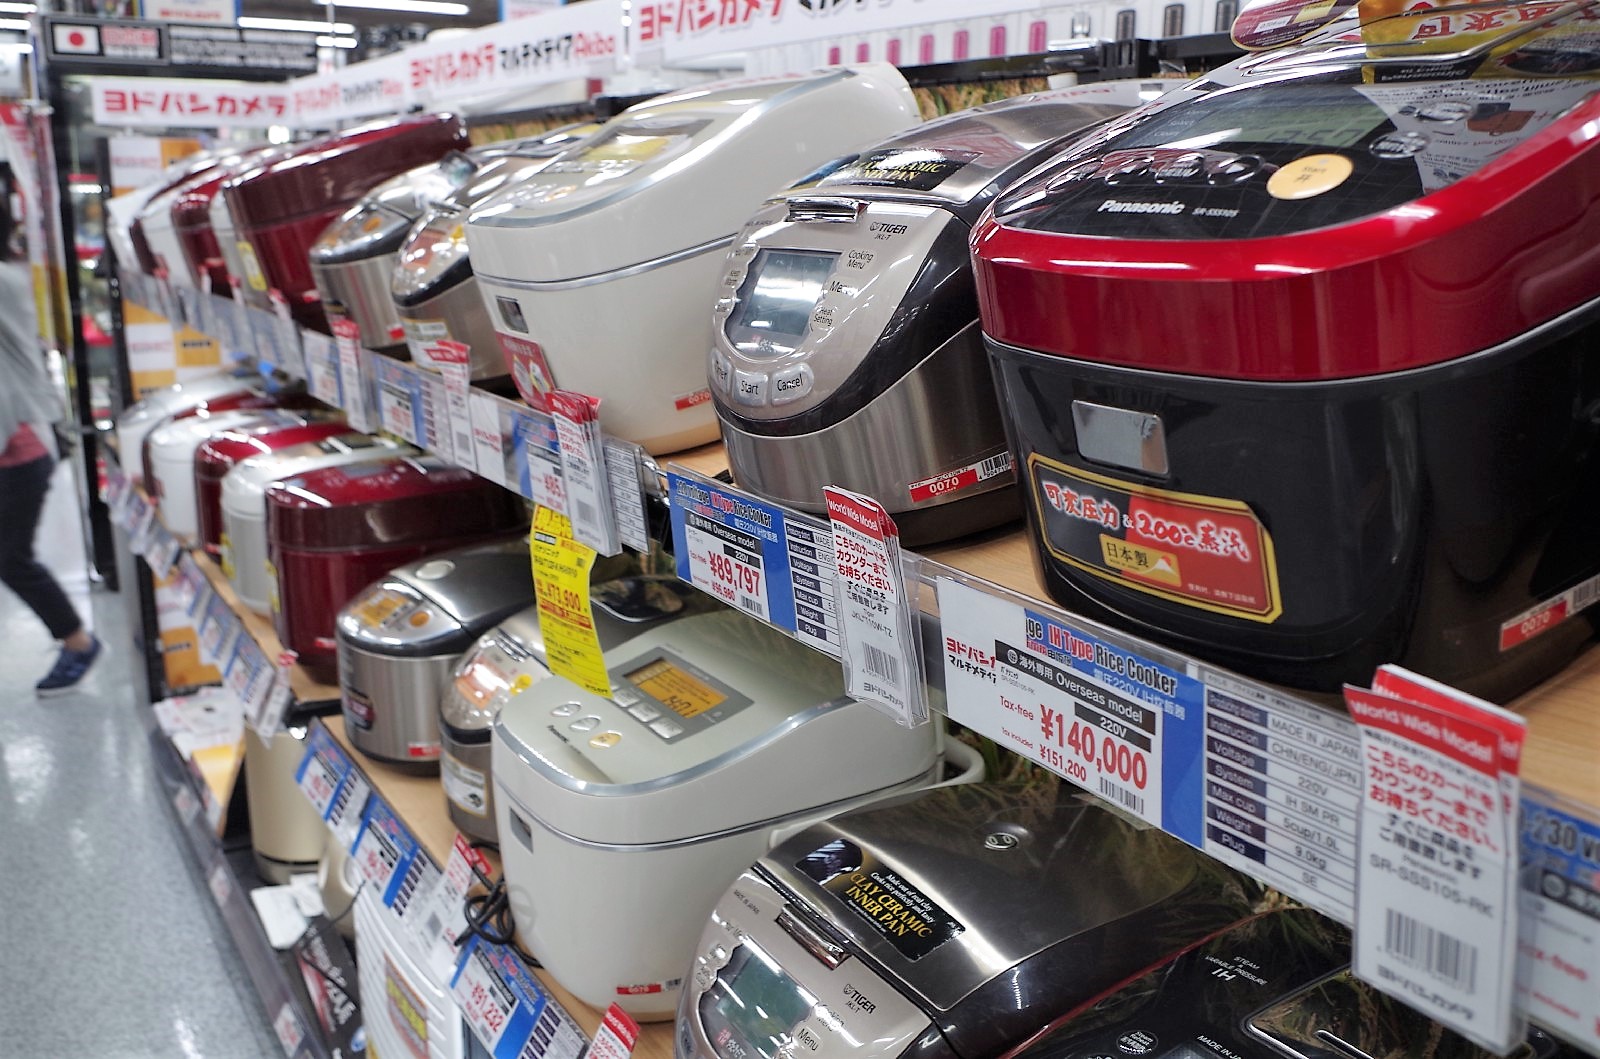 A wide range of rice cookers are sold